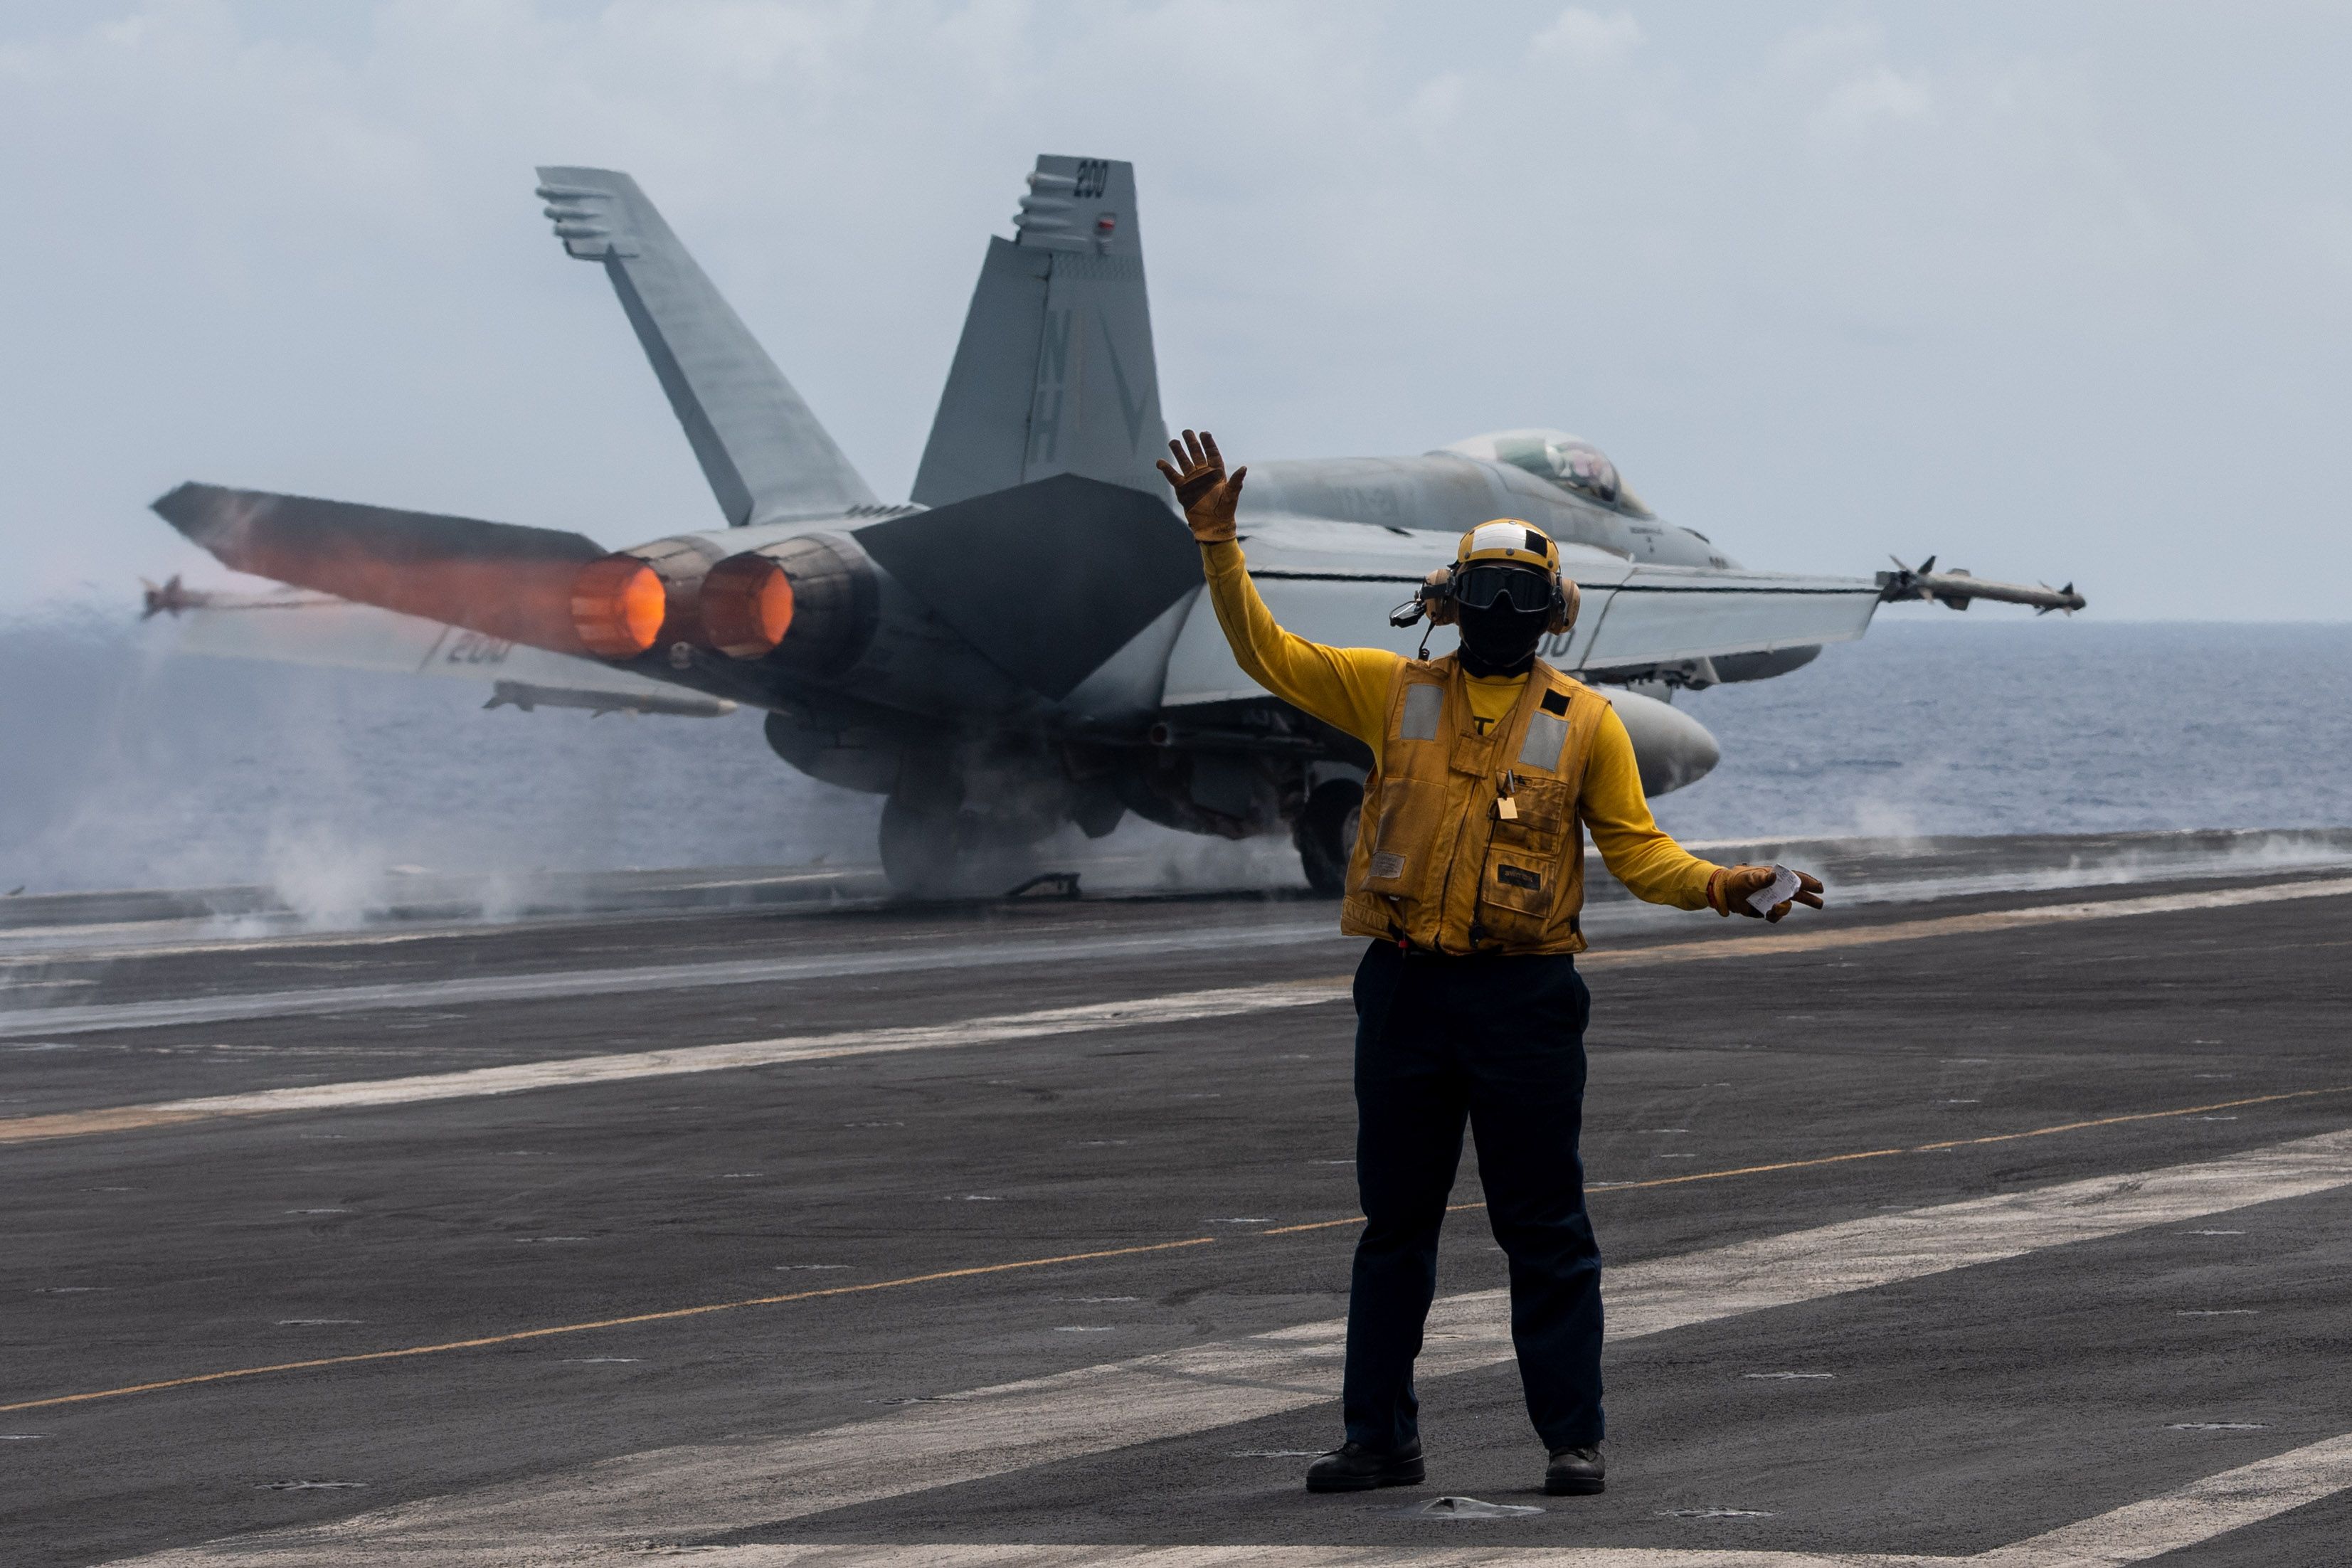 an F/A-18E Super Hornet assigned to the “Flying Checkmates” of Strike Fighter Squadron (VFA) 211 takes off from the flight deck aboard the Nimitz-class aircraft carrier USS Theodore Roosevelt